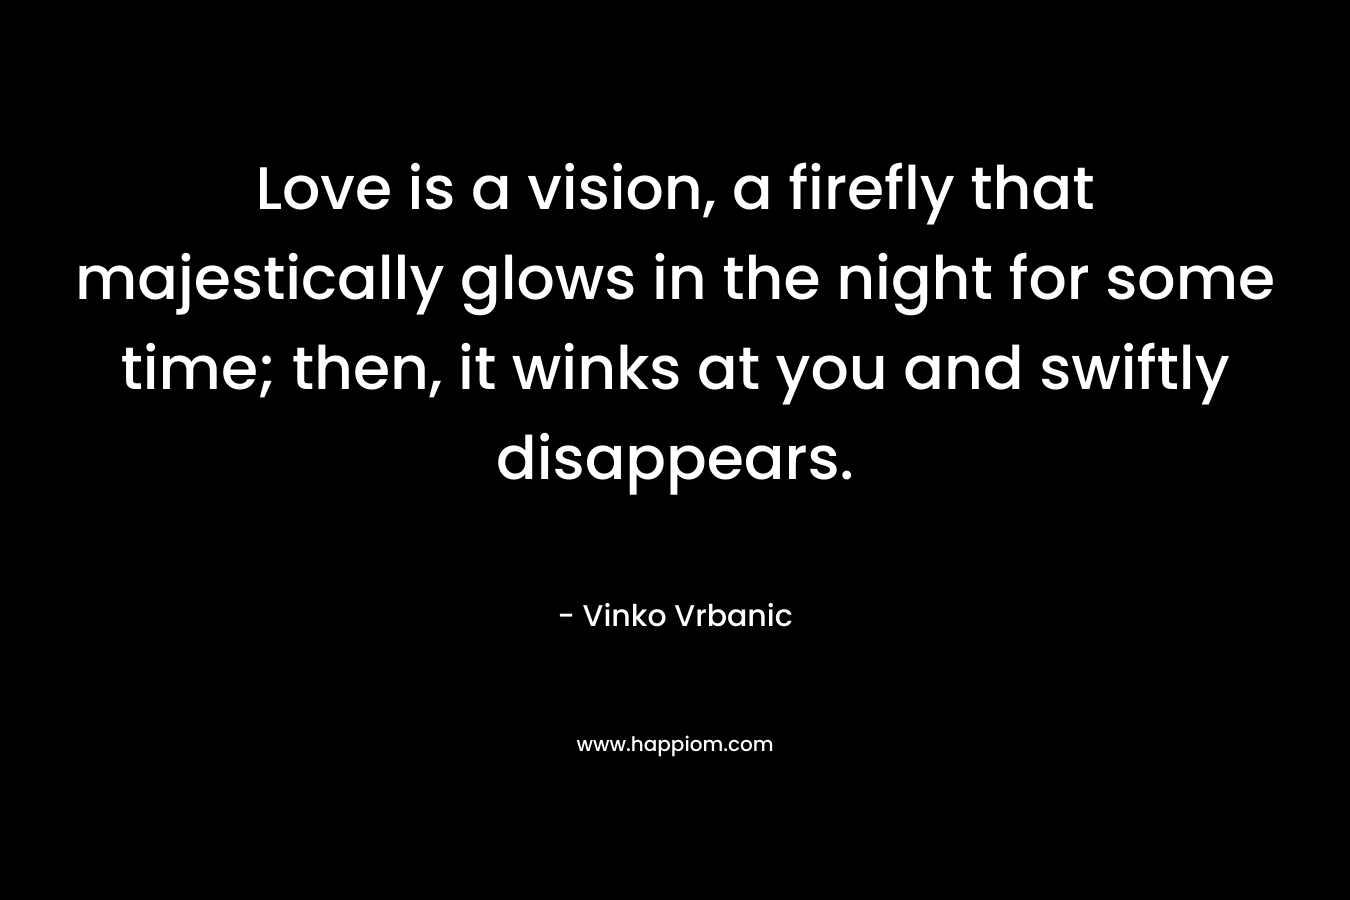 Love is a vision, a firefly that majestically glows in the night for some time; then, it winks at you and swiftly disappears. – Vinko Vrbanic